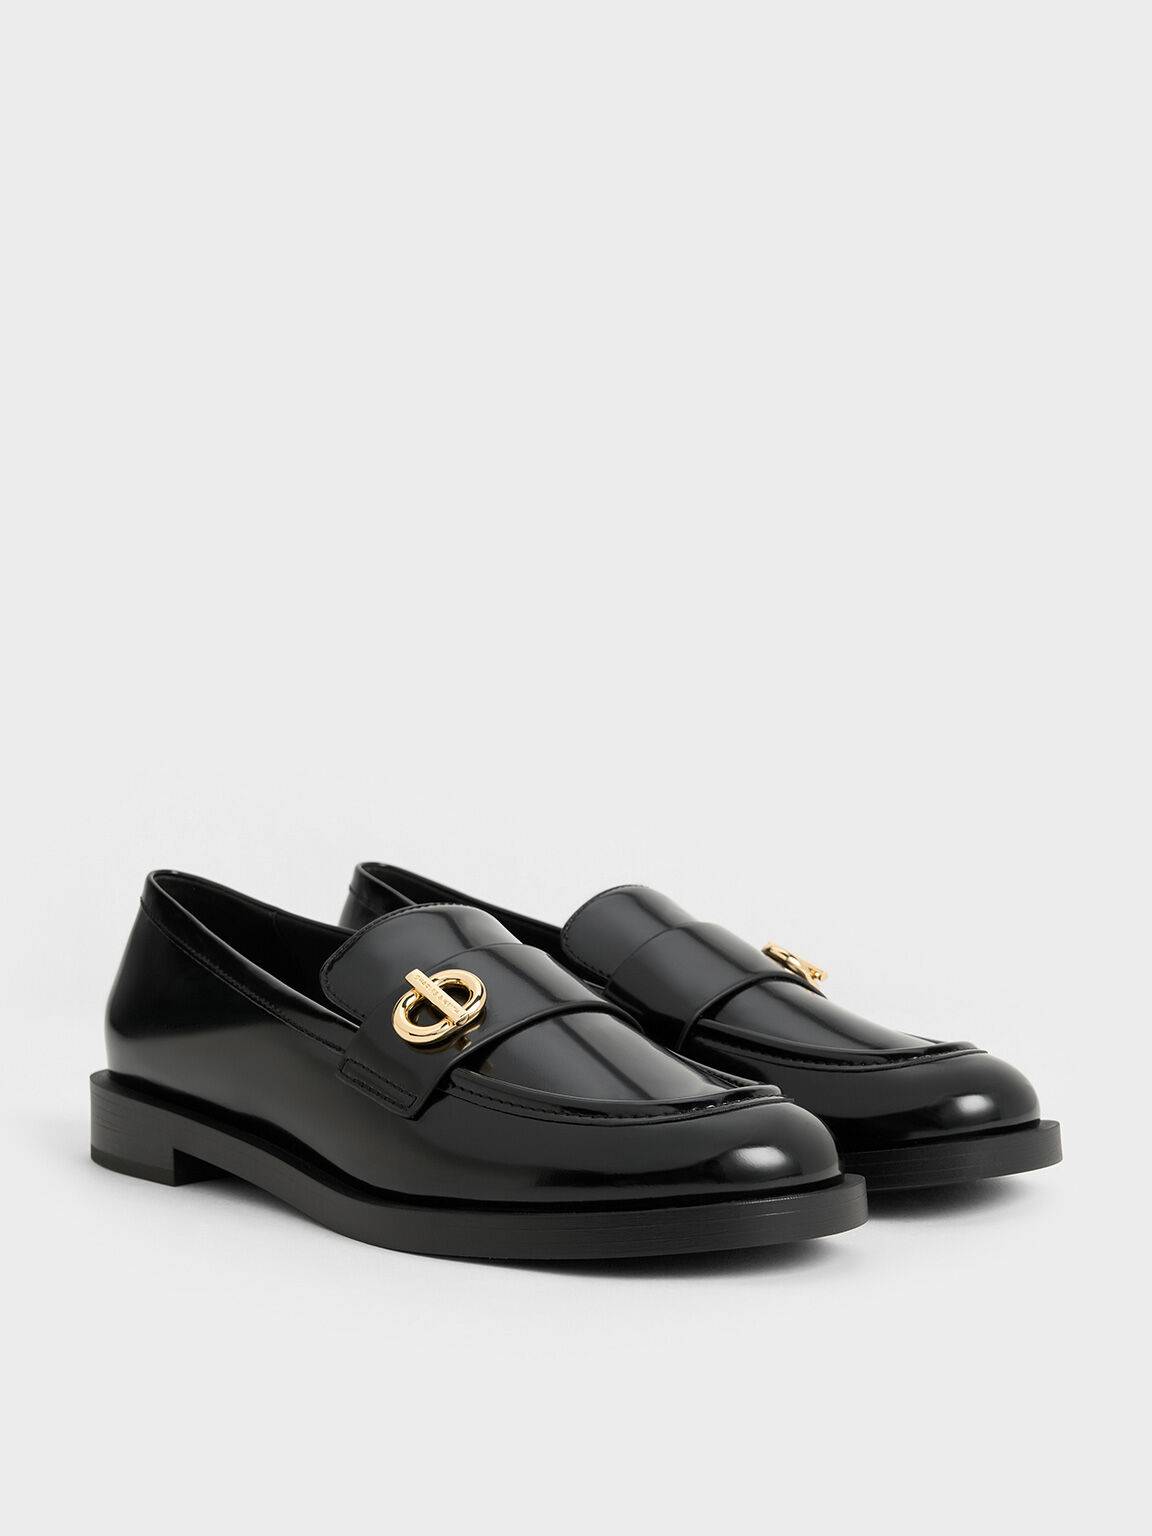 Metallic-Accent Loafers, Black Boxed, hi-res